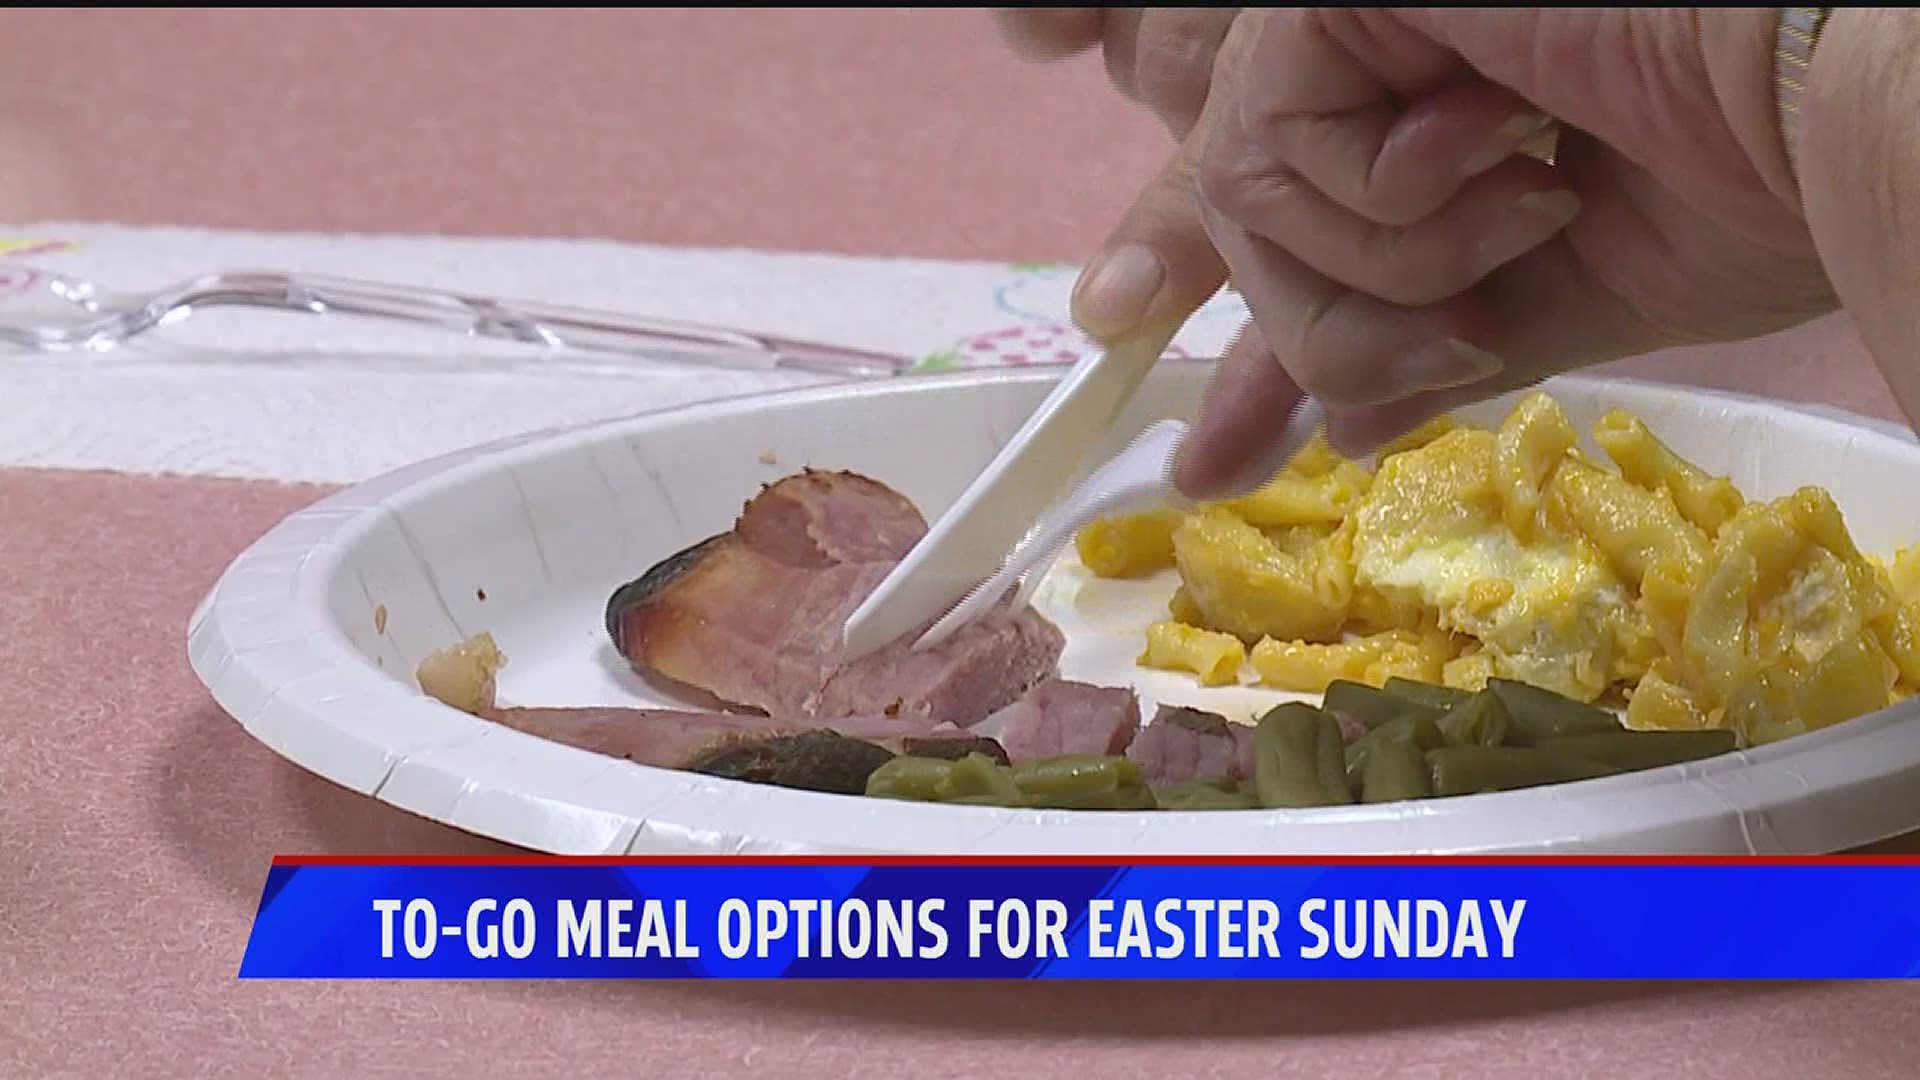 To-Go Meal Options for Easter Sunday to Make Easter easier during the COVID-19 crisis